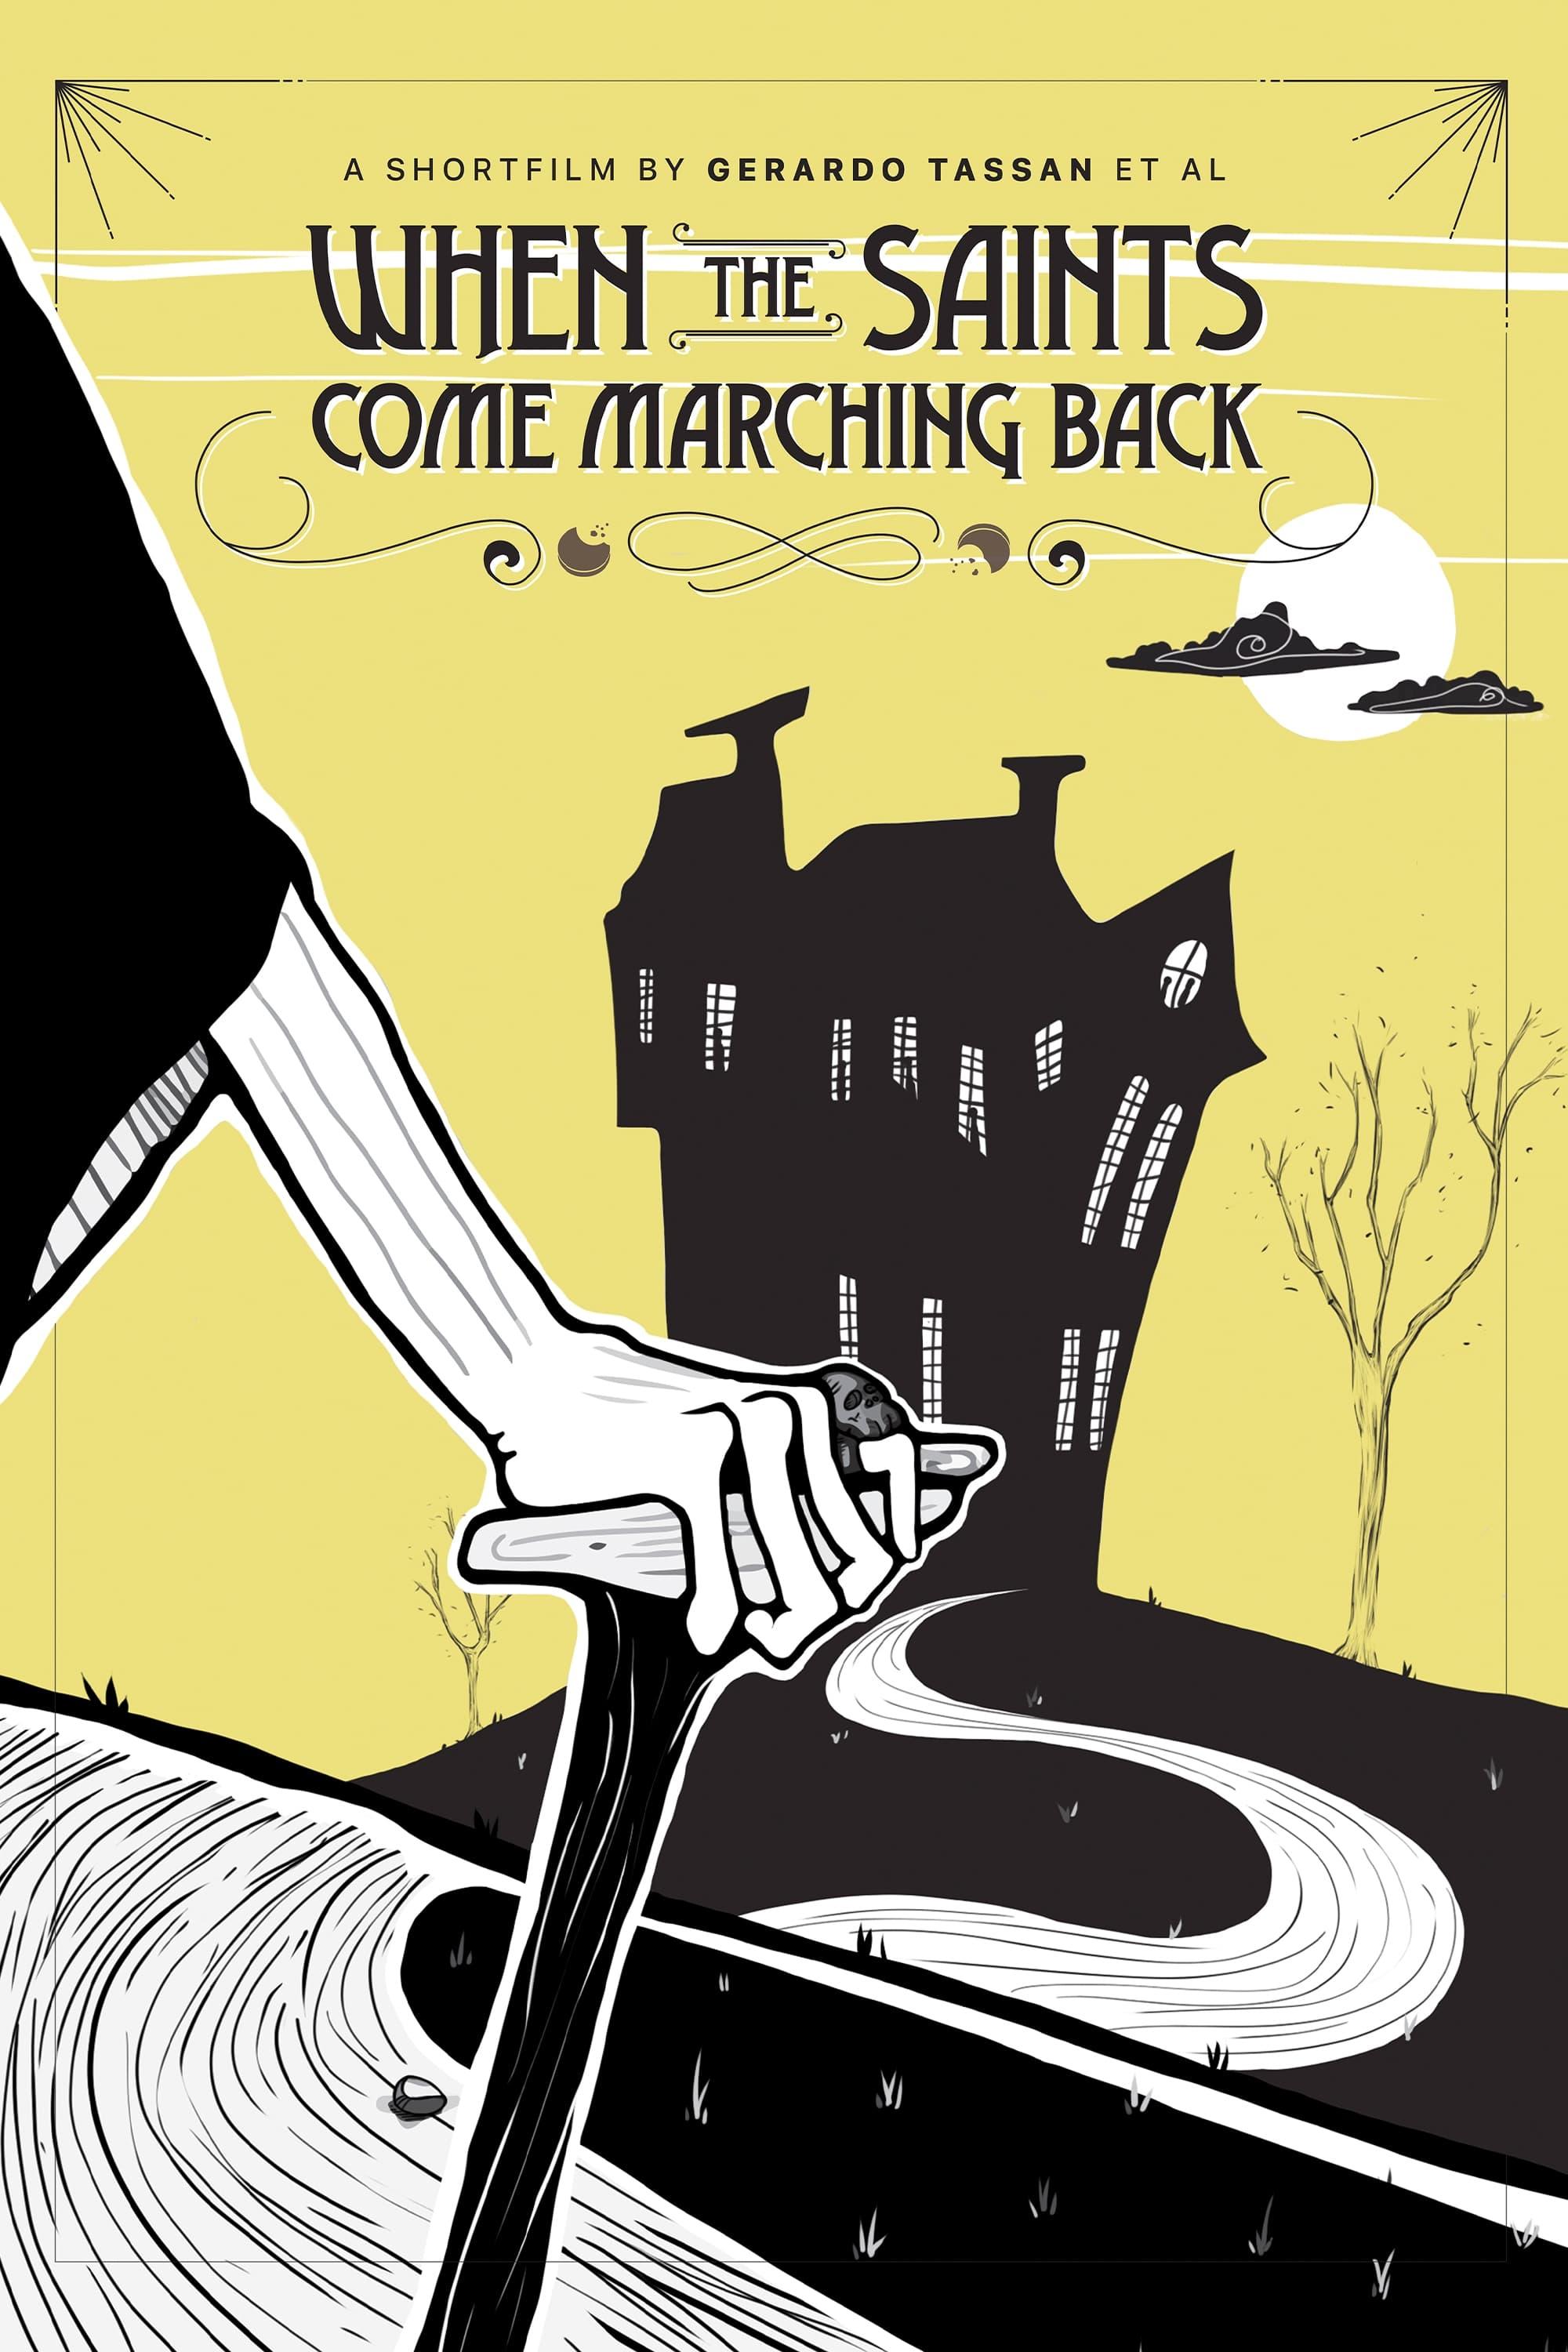 When the saints come marching back poster